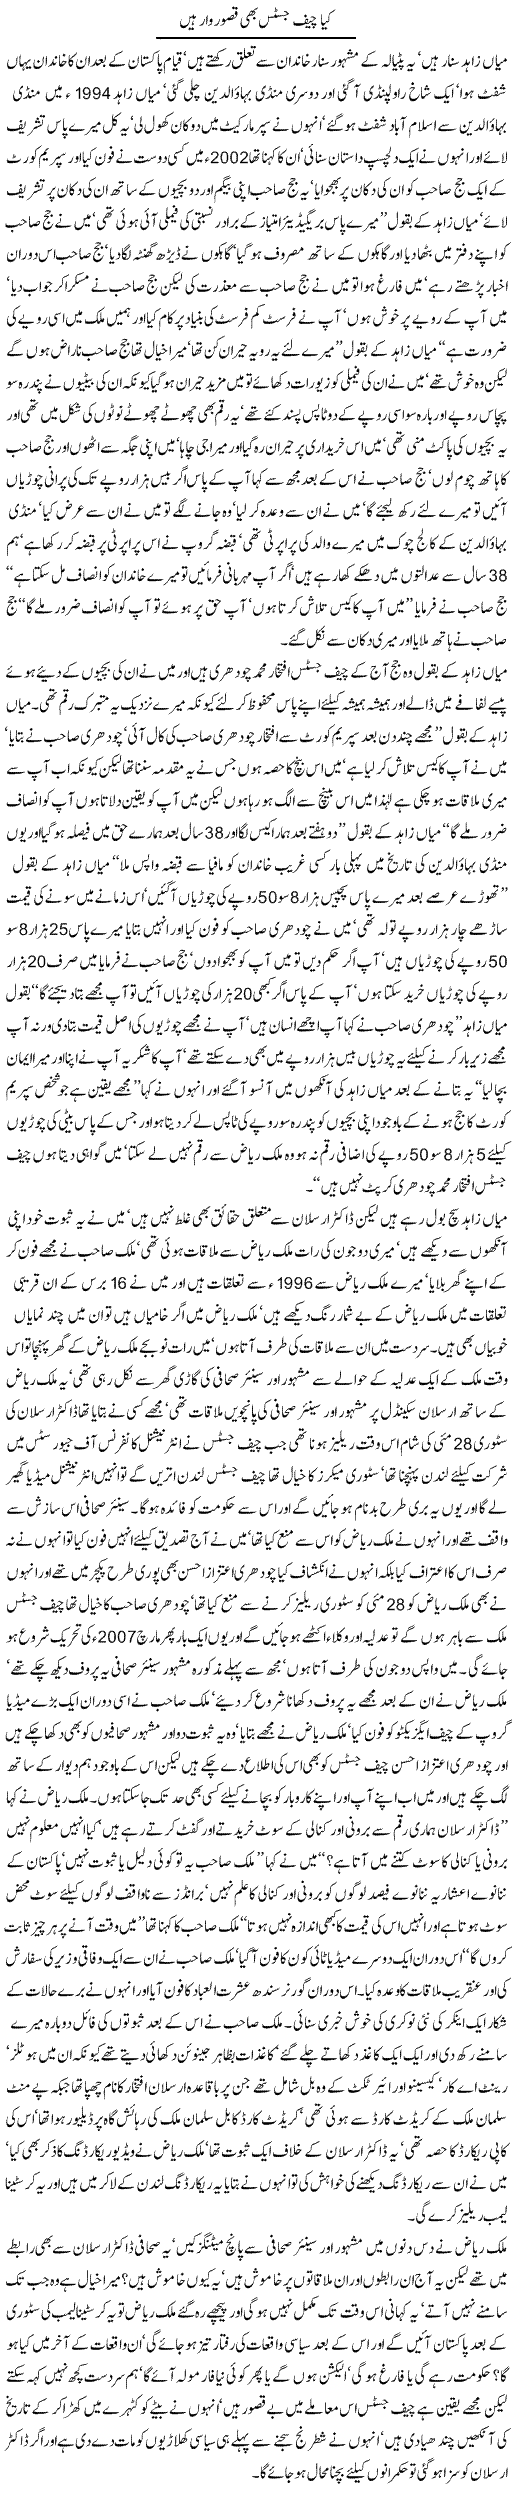 Allegation On Chief Justice Express Column Javed Chaudhry 9 June 2012